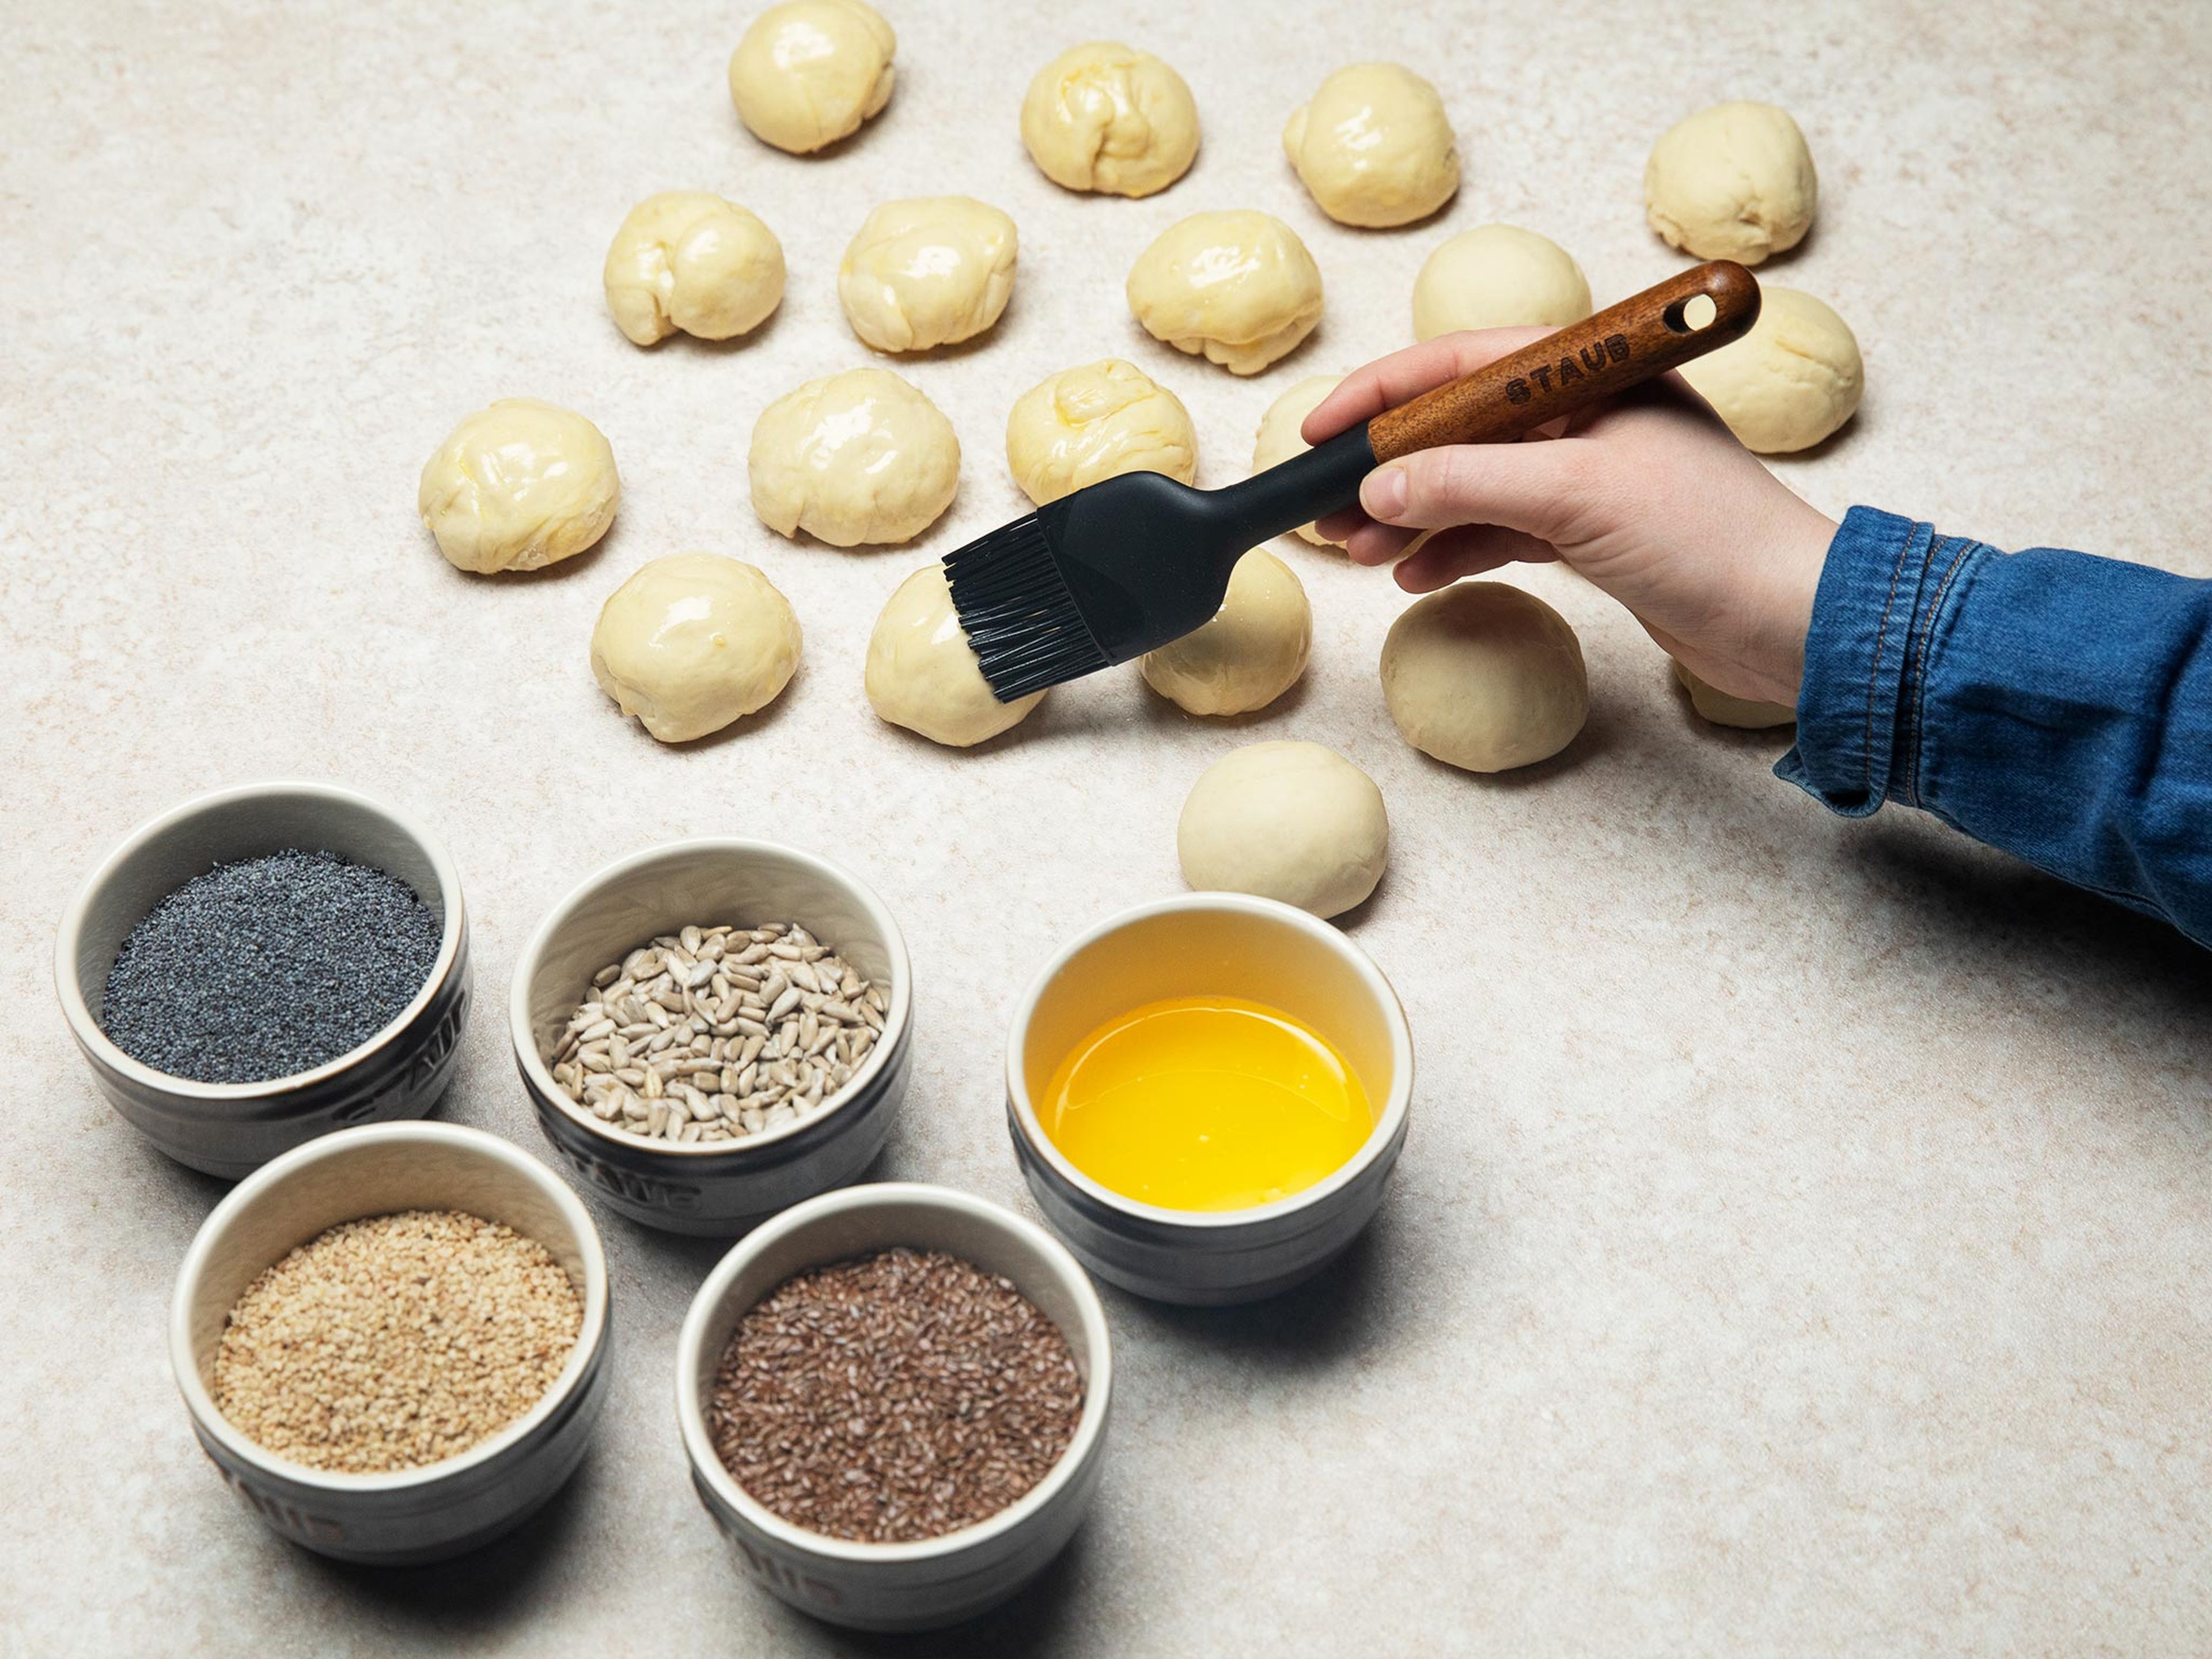 In the meantime, grease the bottom and sides of an oven-proof pan. After the dough has doubled in size, divide it into even pieces. Then brush melted butter on top and dip in either sesame seeds, poppy seeds, flaxseeds, or sunflower seeds—alternating the seeds as you brush and dip.